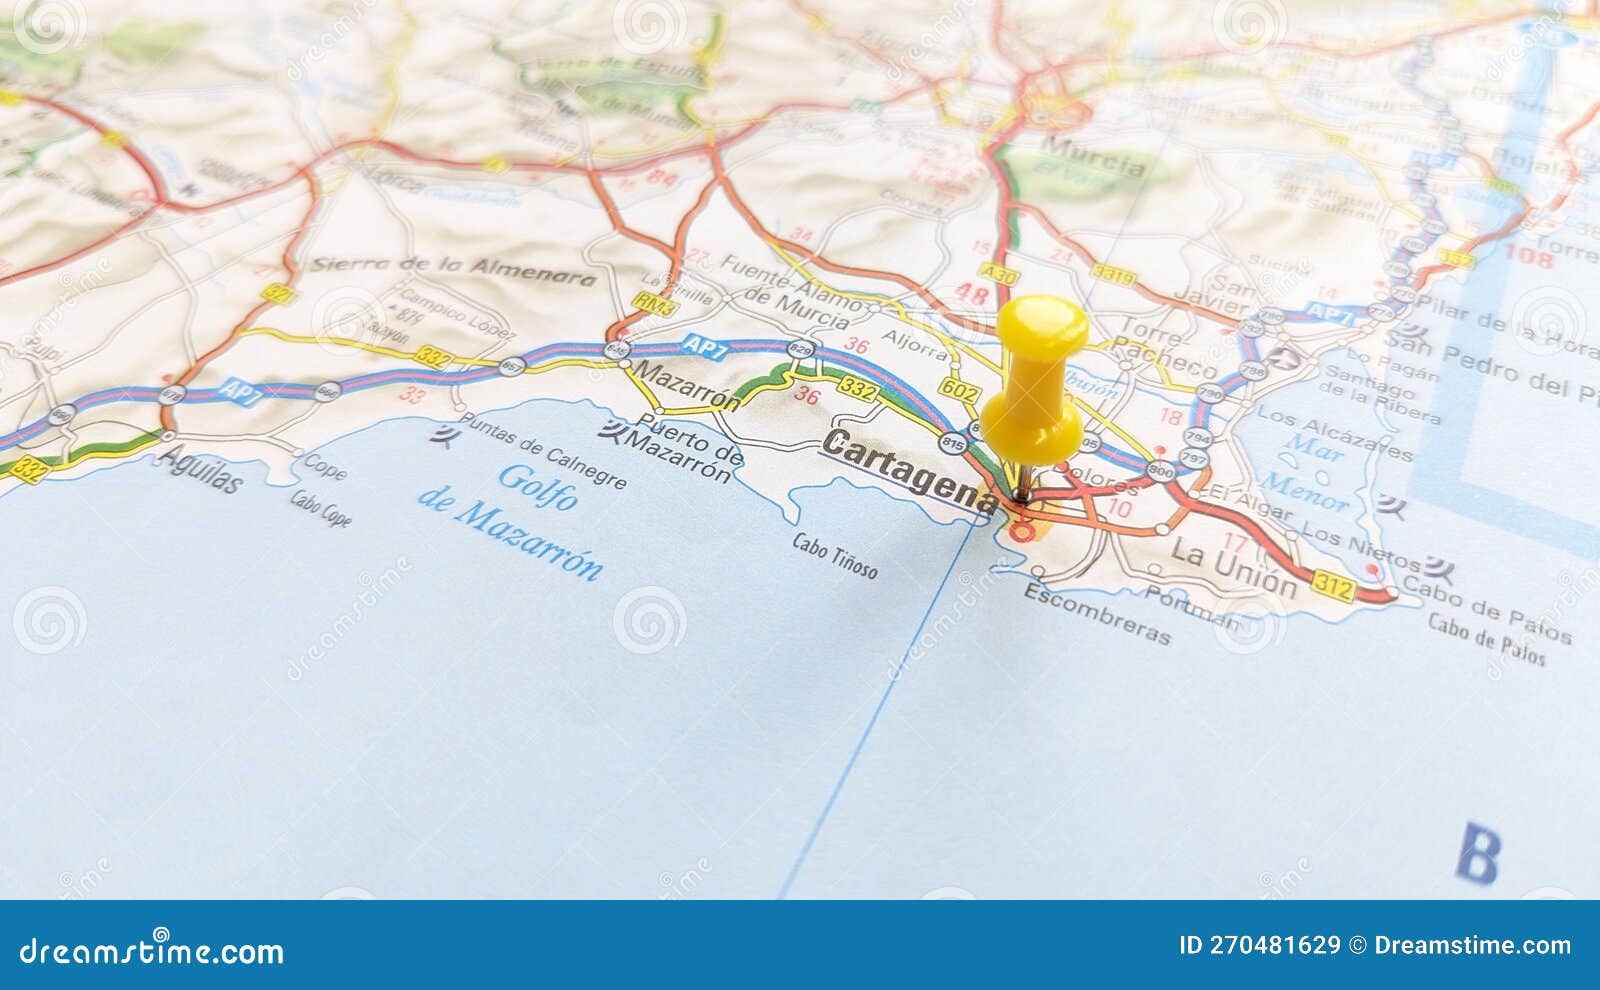 a yellow pin stuck in cartagena on a map of spain